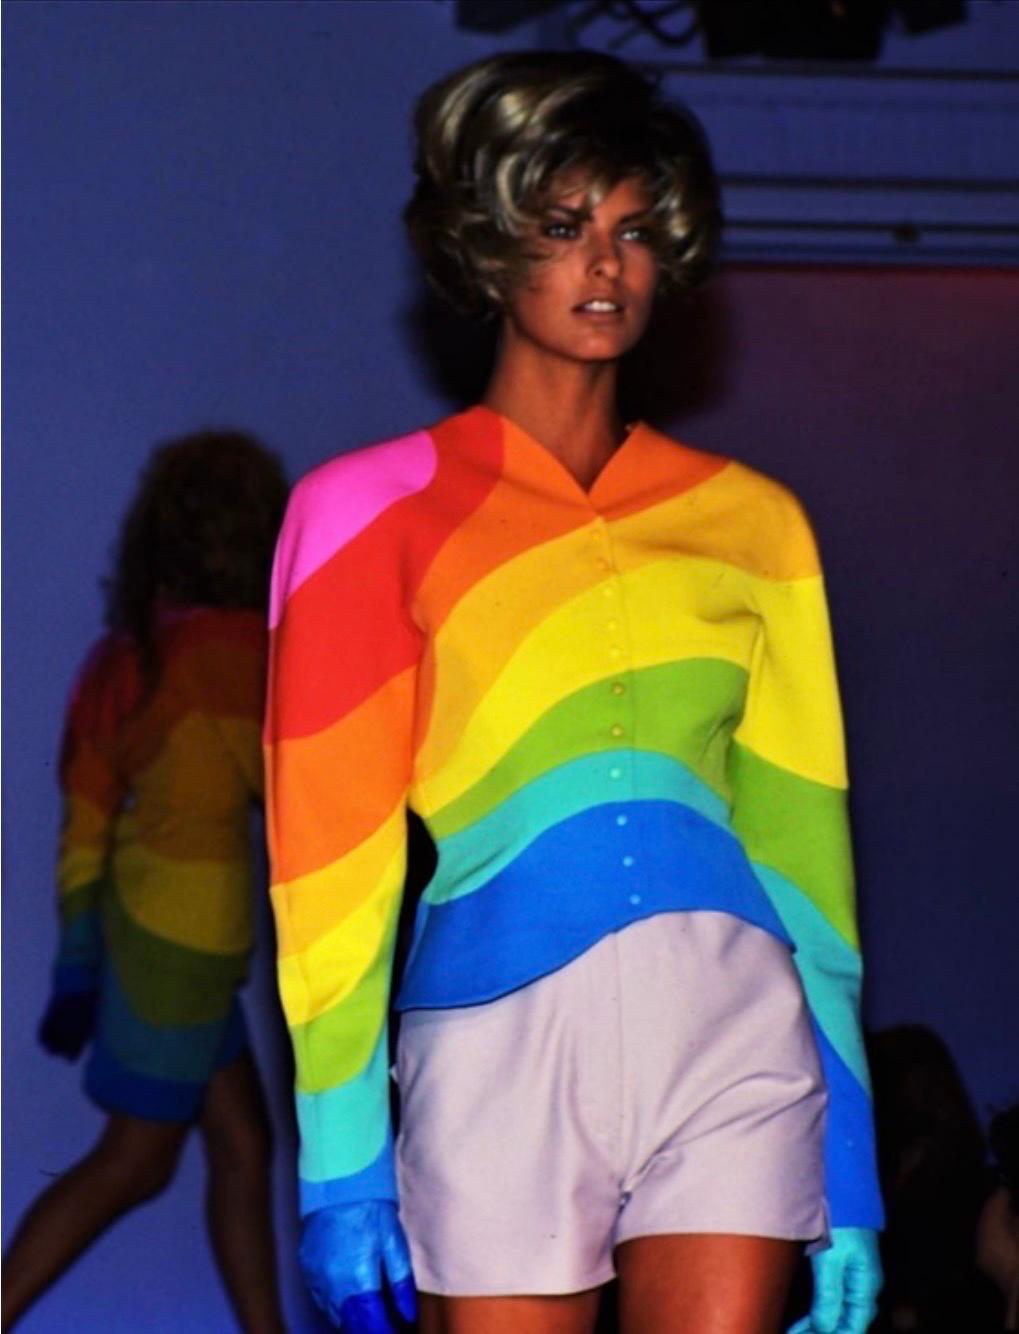 Own a true piece of wearable art and history!
Ultra rare museum worthy Thierry Mugler jacket from the Spring Summer 1990 Collection.
“Arc En Ciel” (Rainbow) in brushed woolen canvas with large multicolored waves.
Features a fitted cut with shoulder